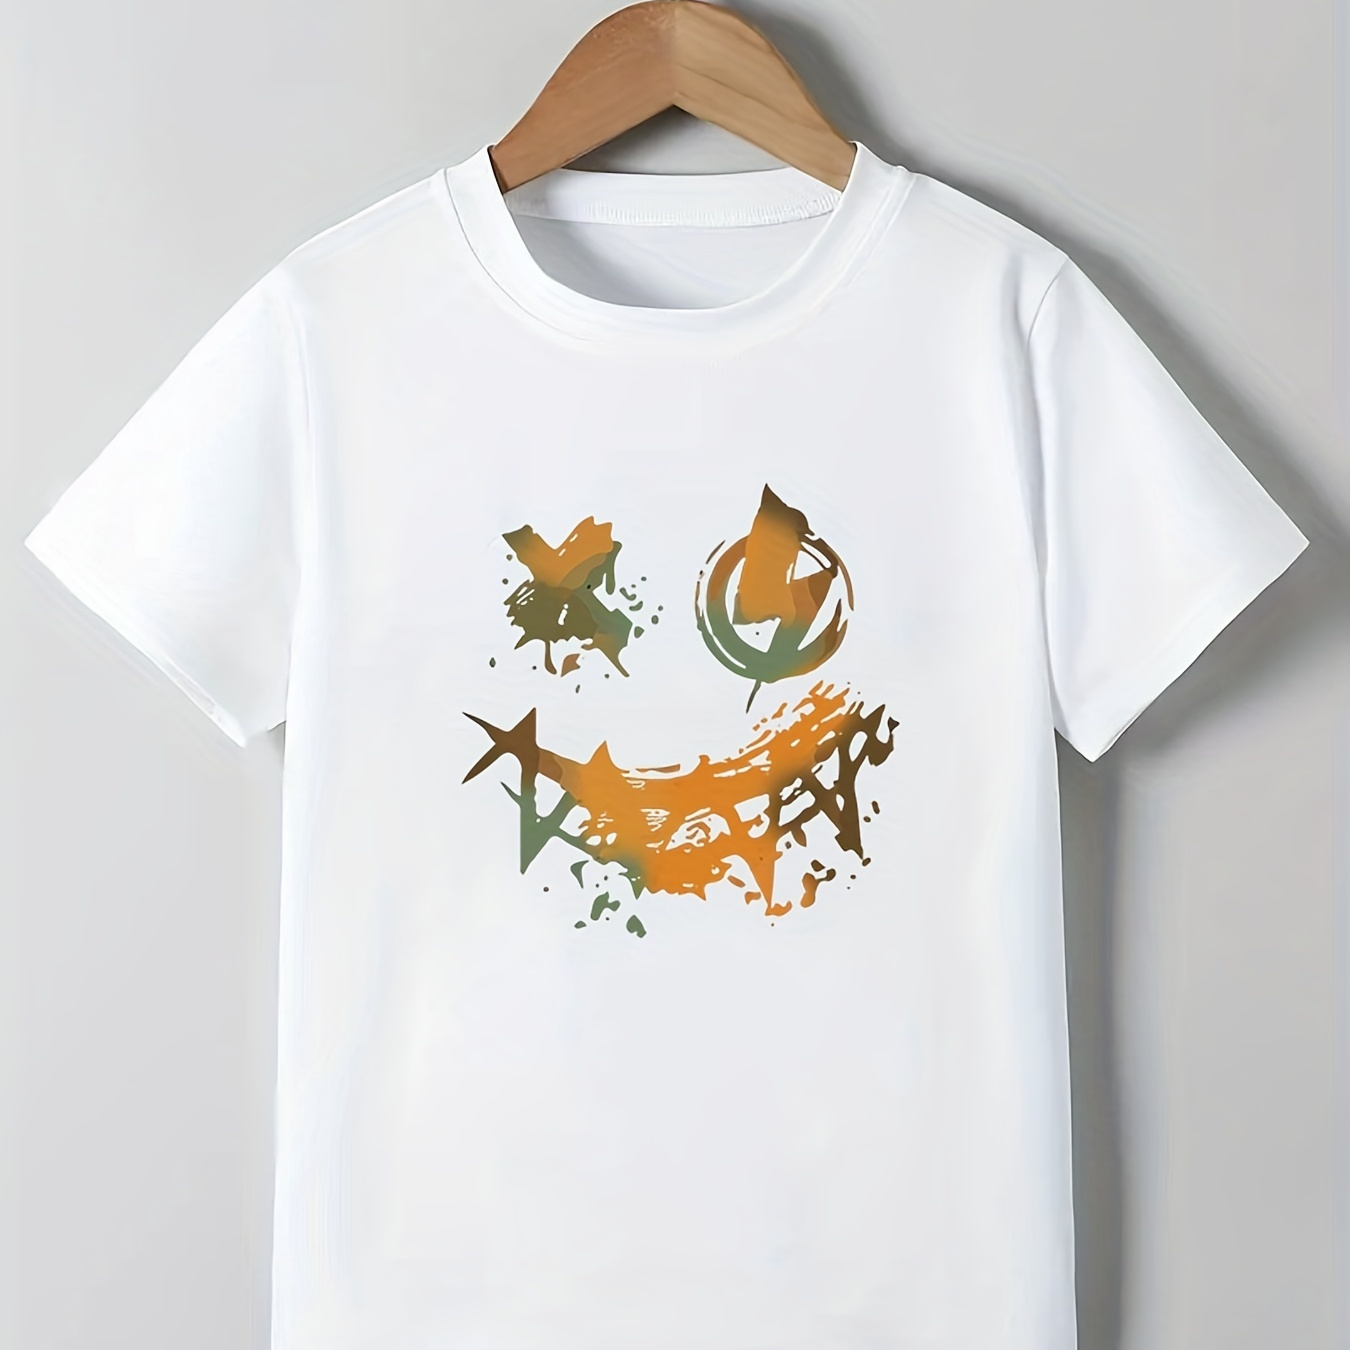 

Trendy Smiling Print Boys Creative T-shirt, Casual Lightweight Comfy Short Sleeve Tee Tops, Kids Clothings For Summer